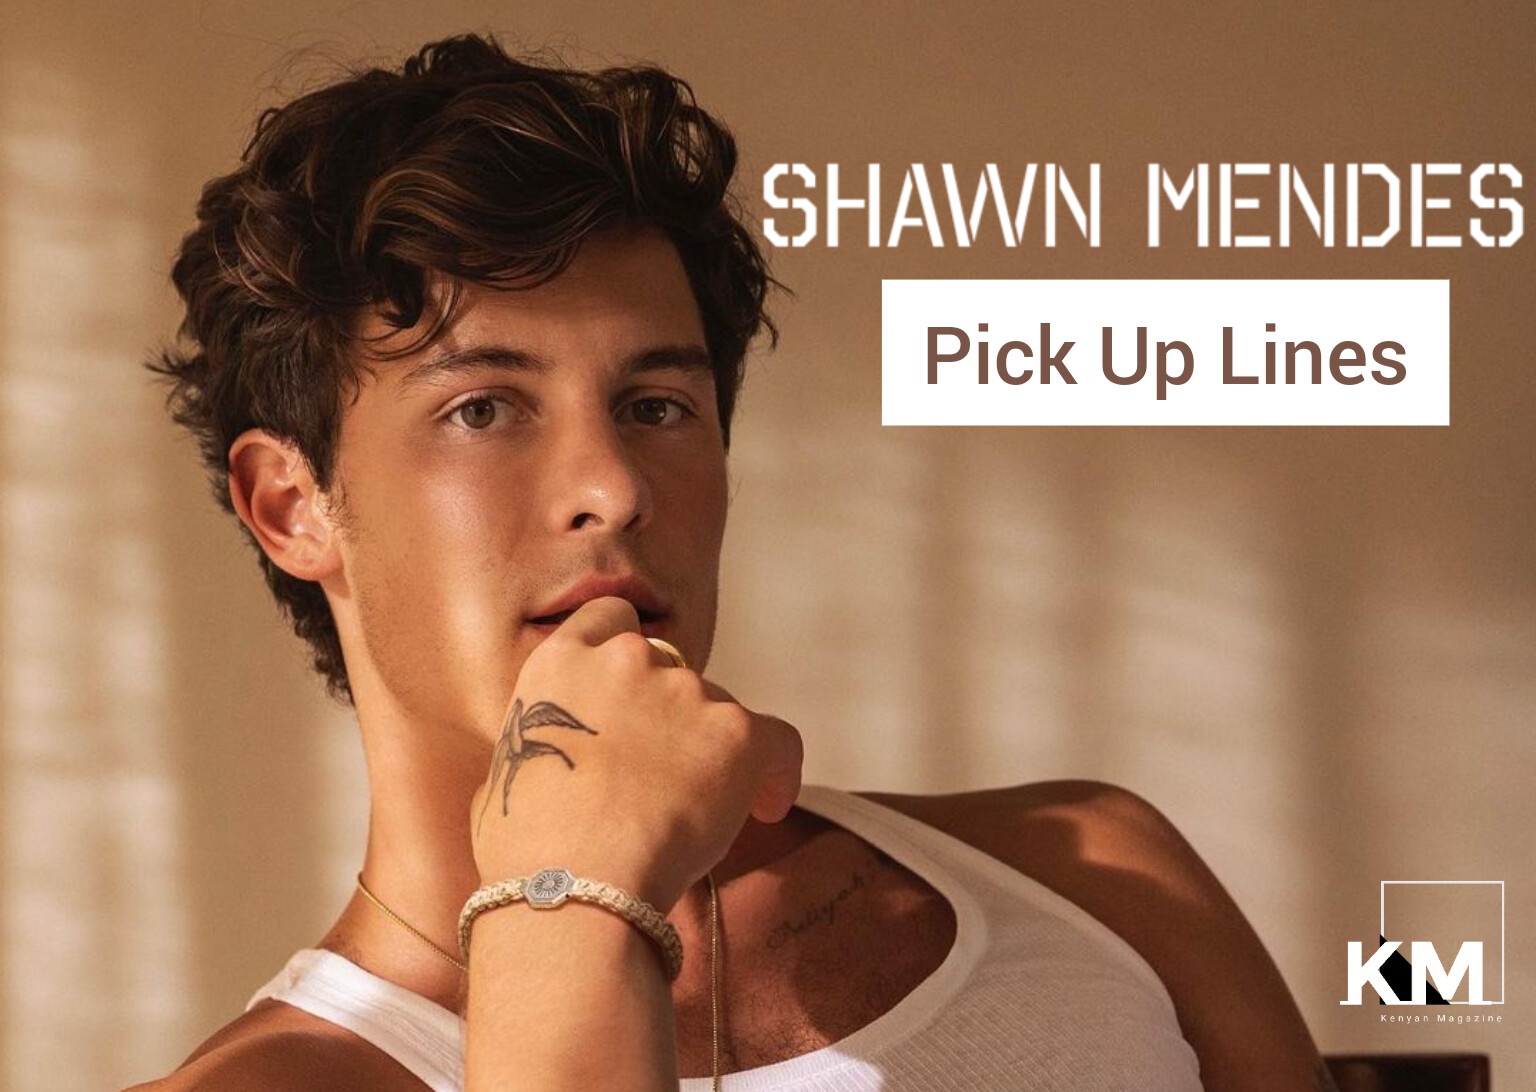 Shawn Mendes Pick up lines